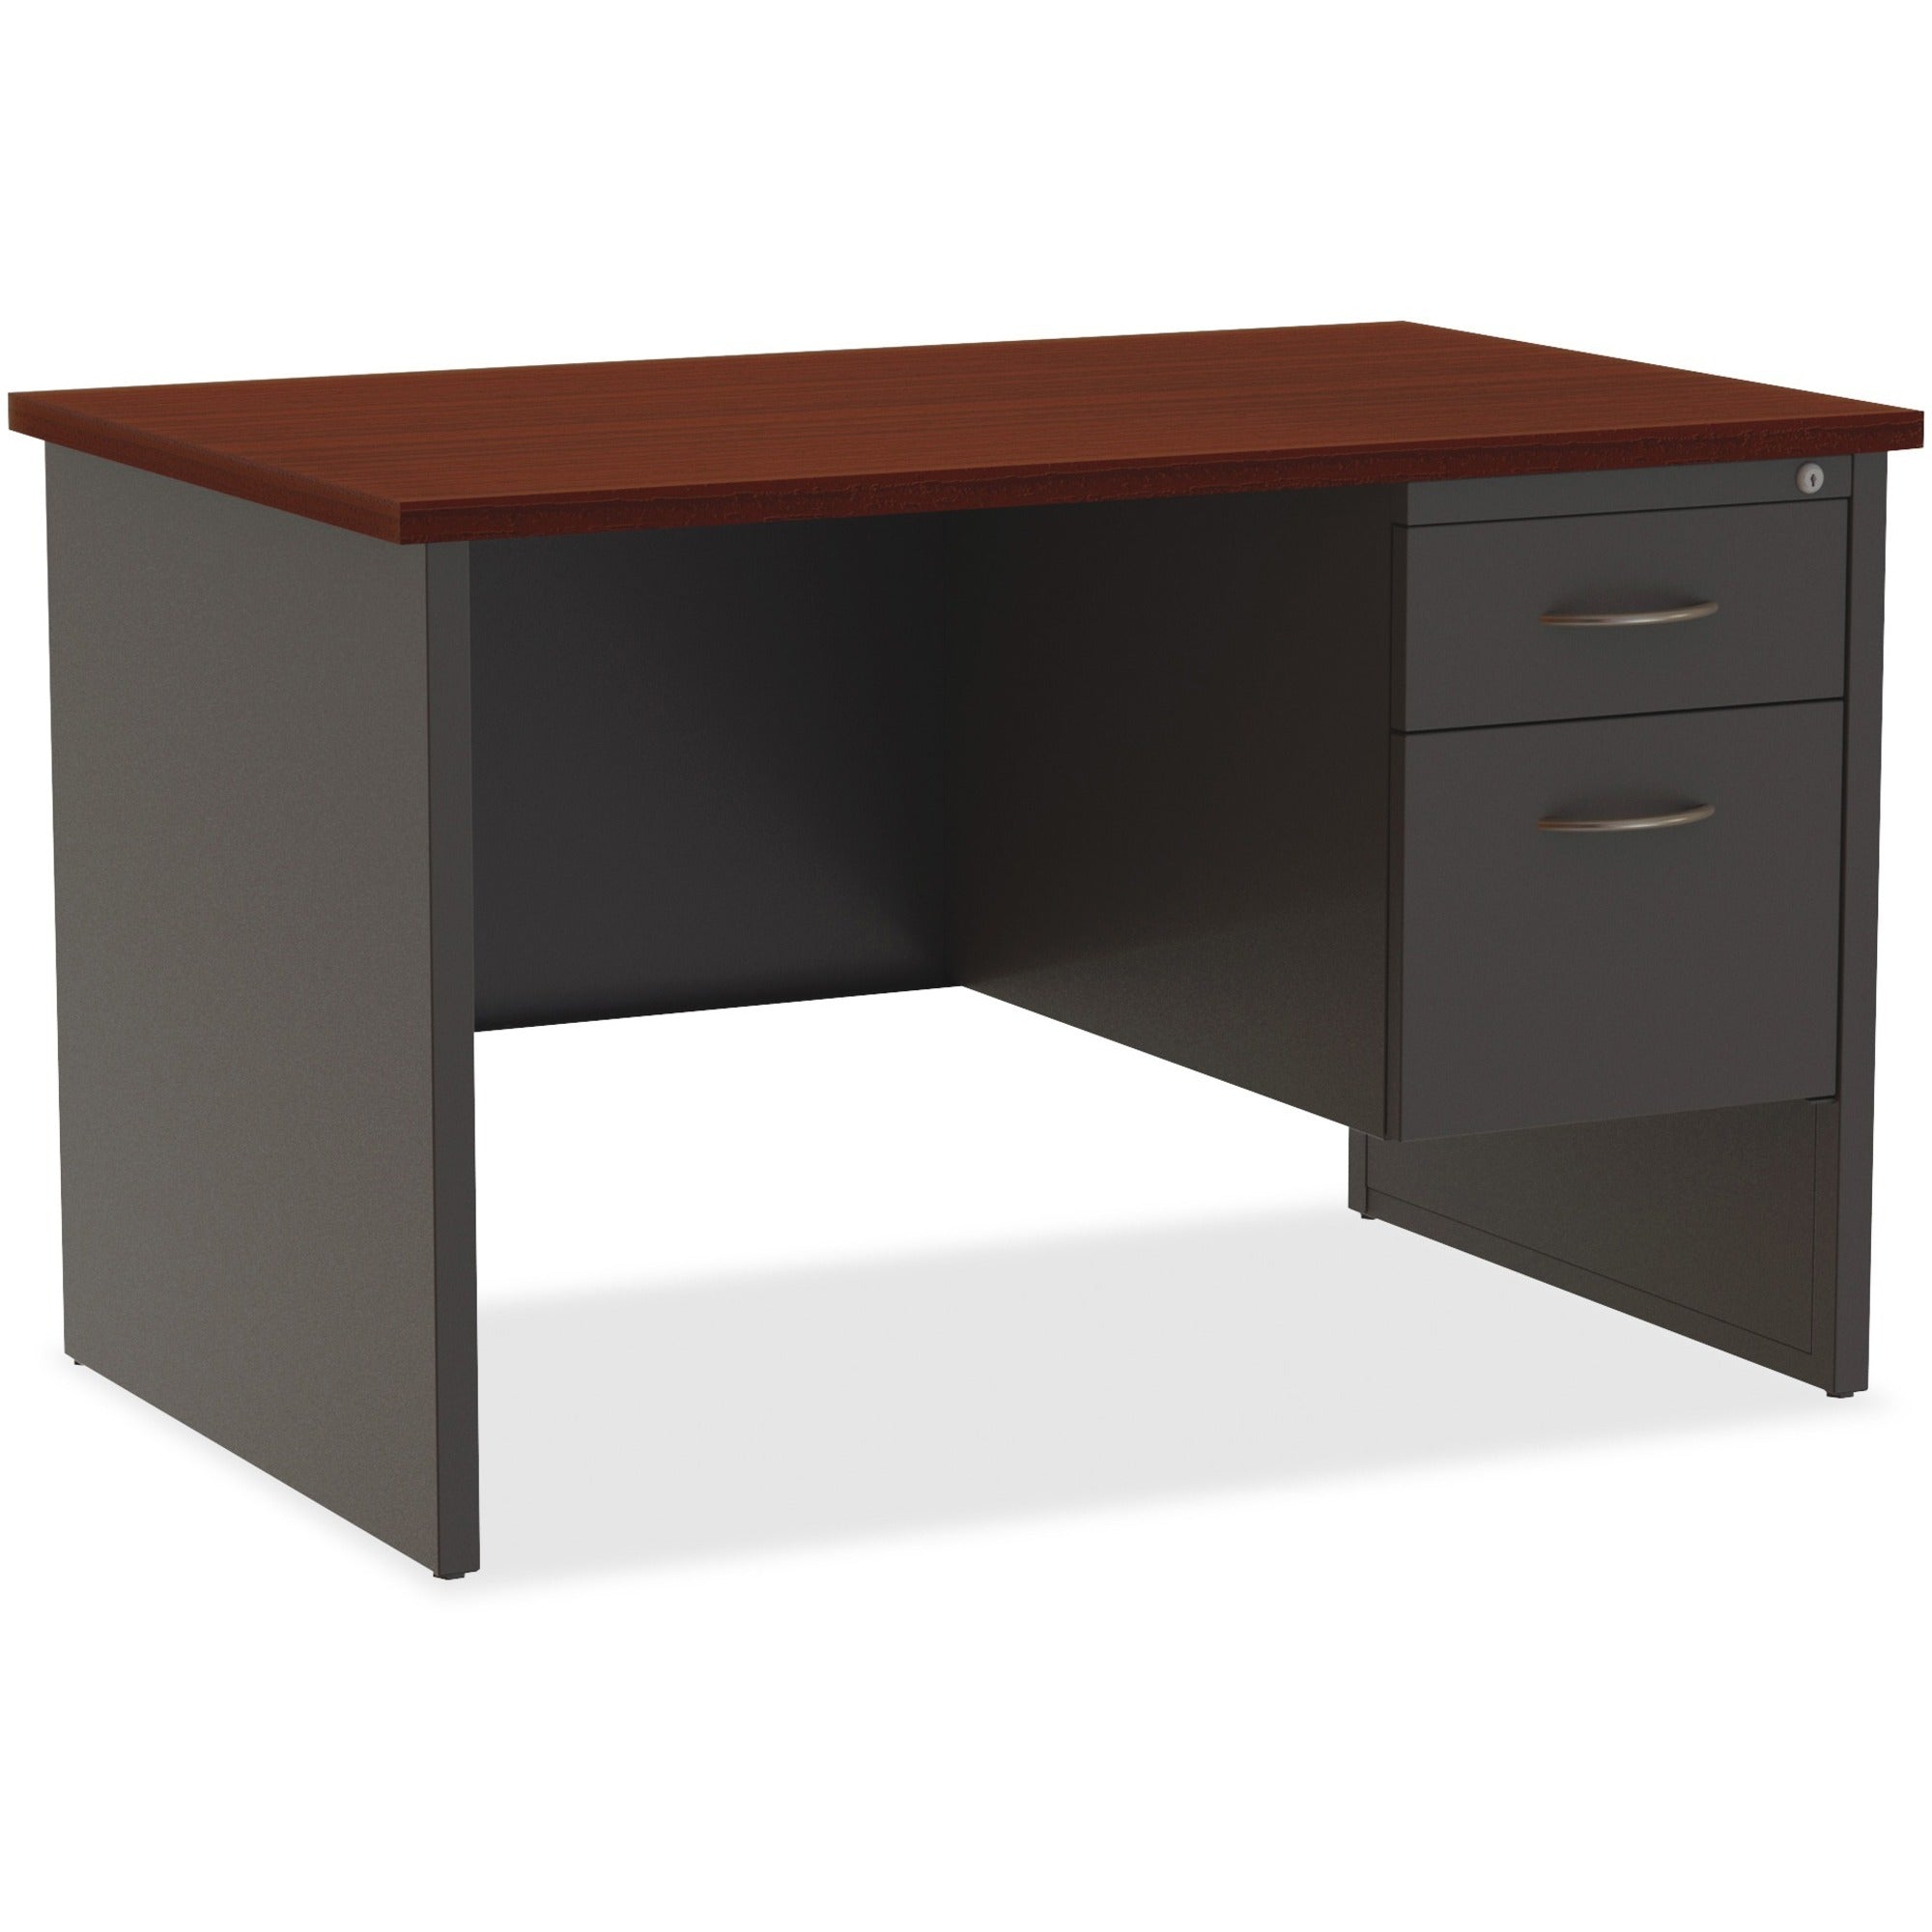 Lorell Fortress Modular Series Right-Pedestal Desk - 48" x 30" , 1.1" Top - 2 x Box, File Drawer(s) - Single Pedestal on Right Side - Material: Steel - Finish: Mahogany Laminate, Charcoal - Scratch Resistant, Stain Resistant, Ball-bearing Suspension, - 